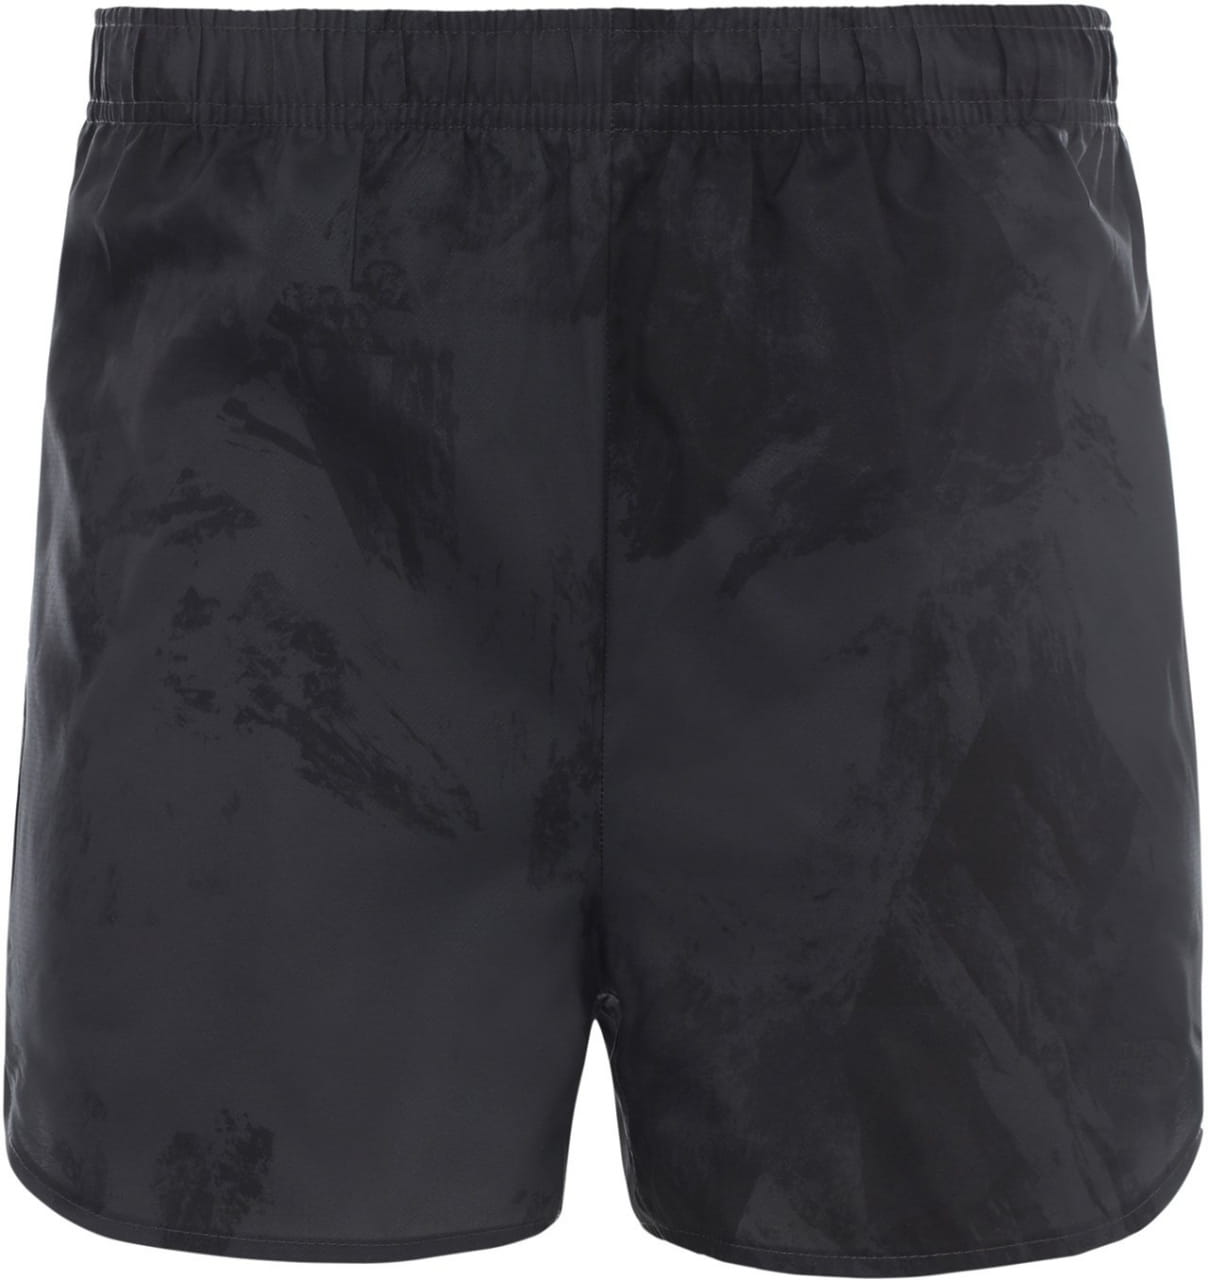 Shorts The North Face Women's Active Trail Running Shorts